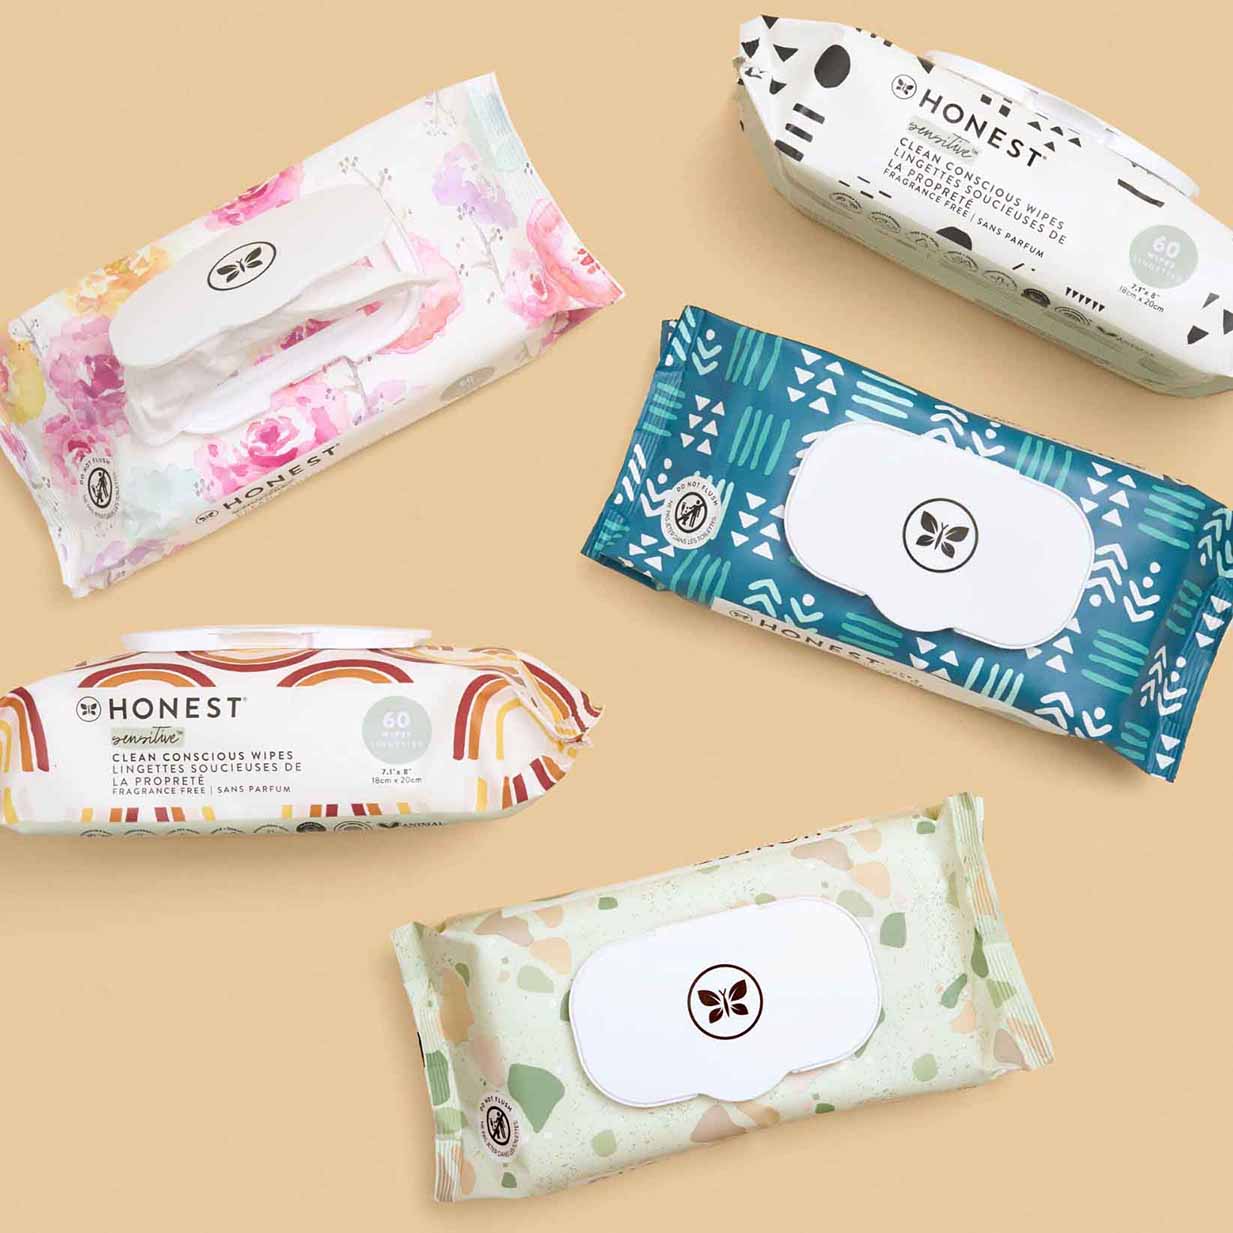 Honest baby wipes in different designed packaging